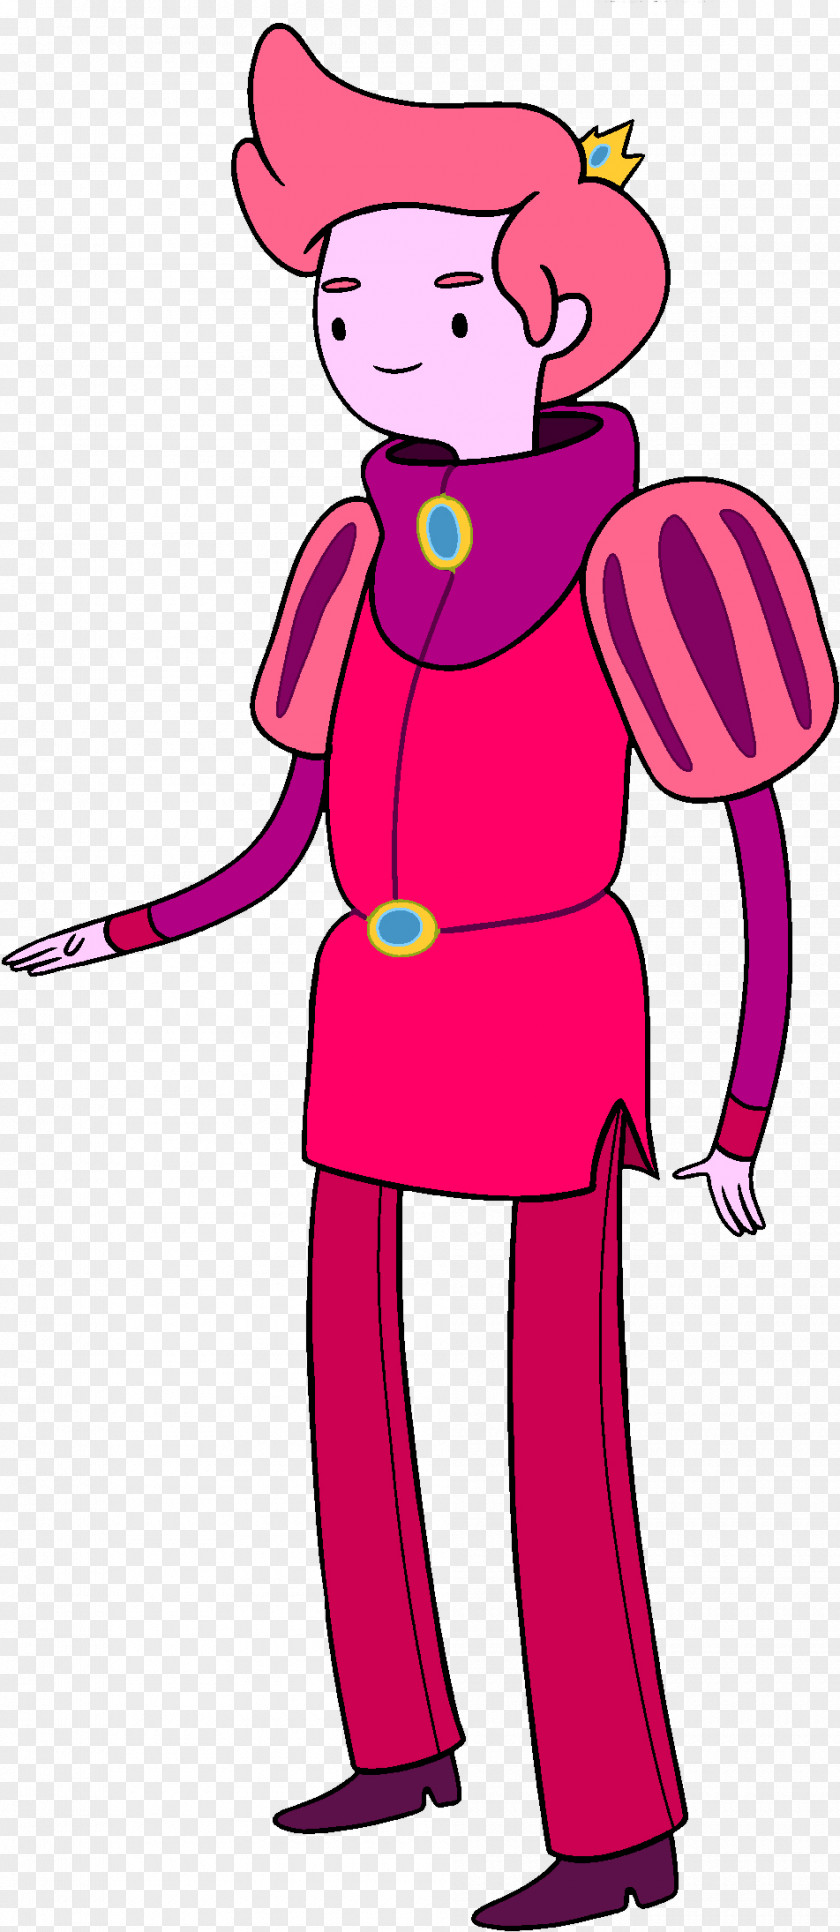 Adventure Time Marceline The Vampire Queen Ice King Princess Bubblegum Fionna And Cake Character PNG